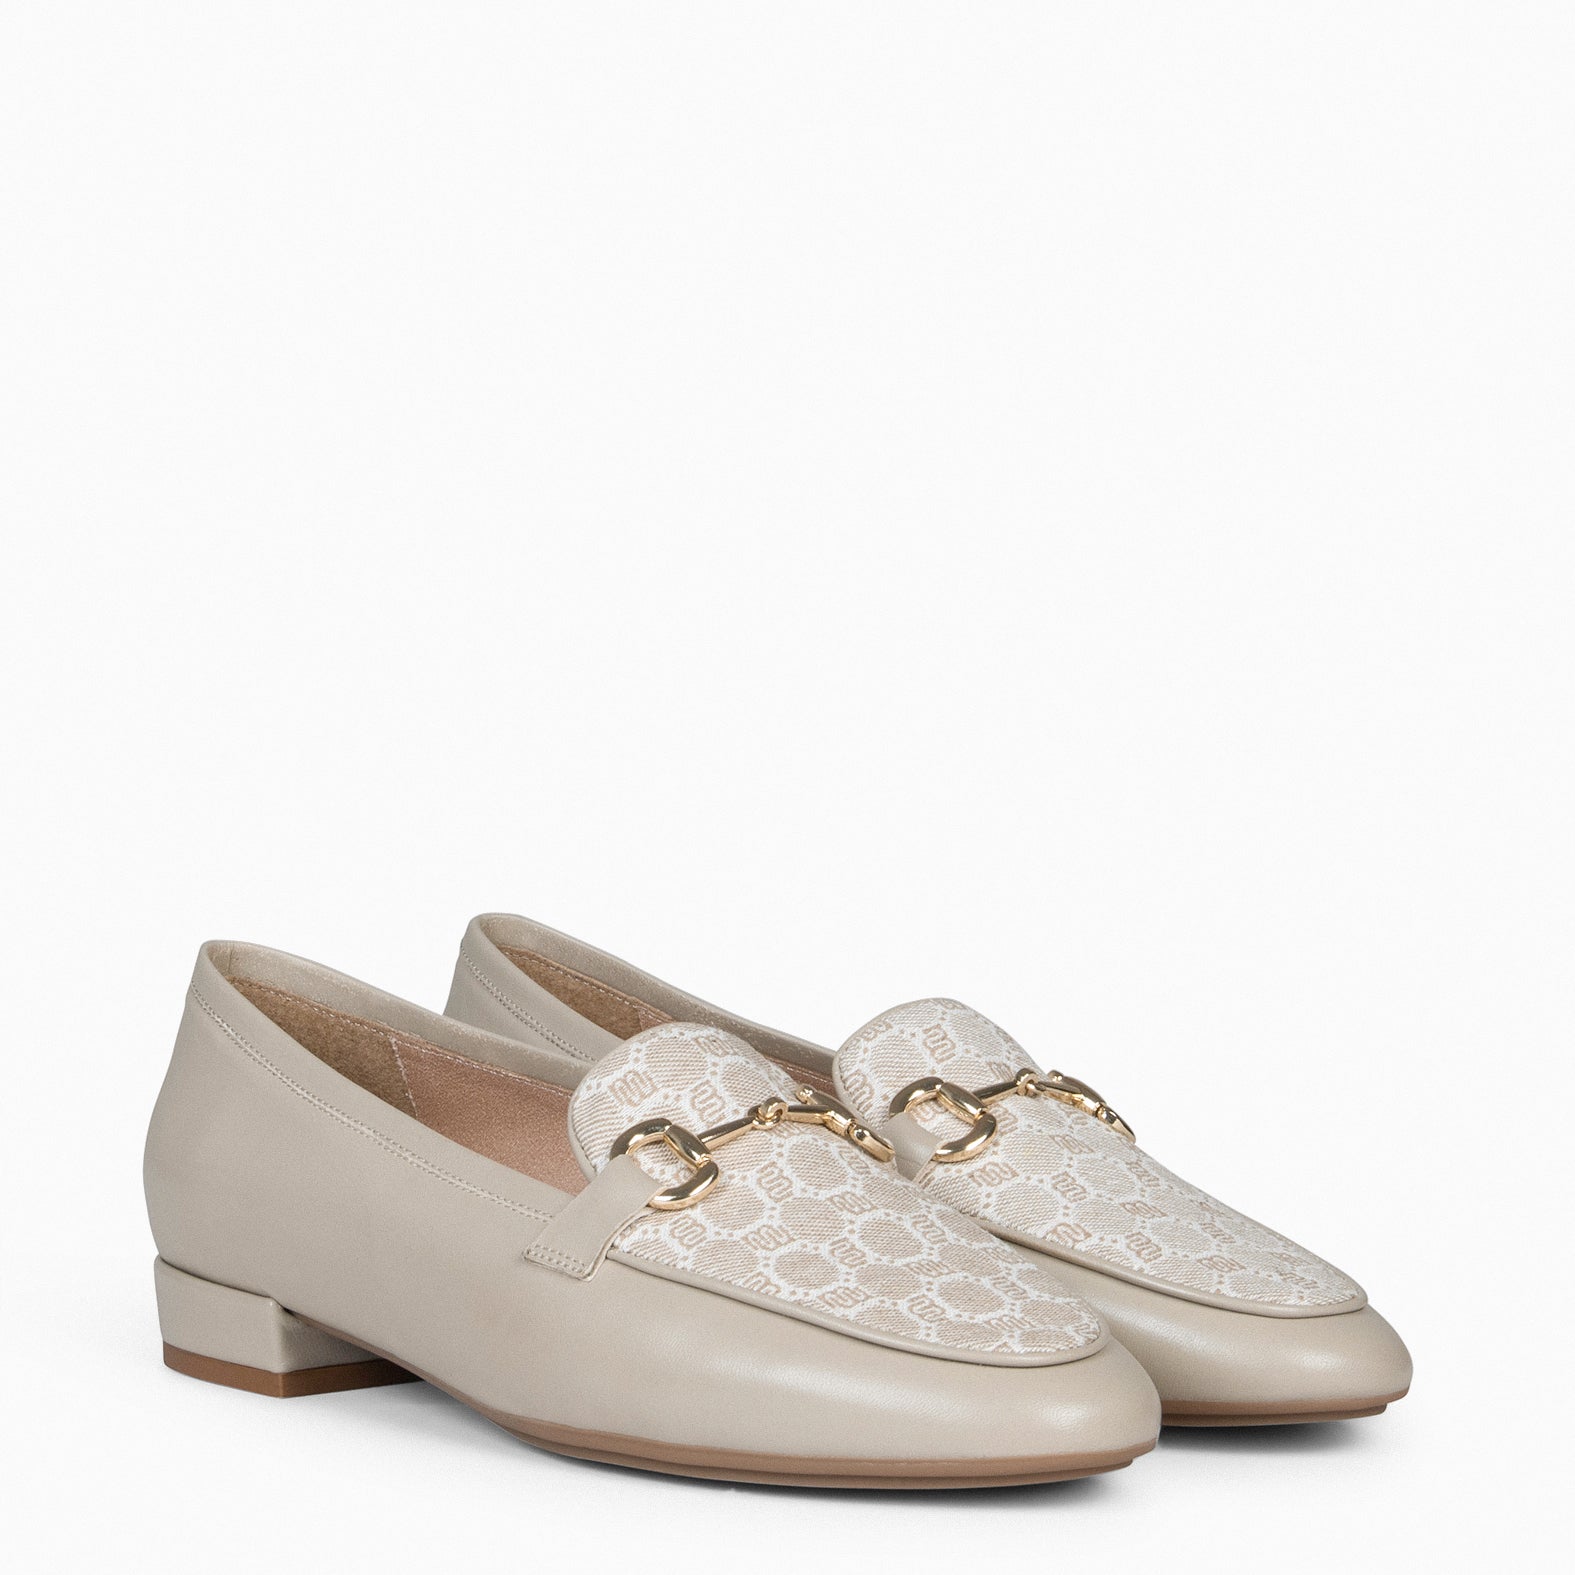 CALYPSO - TAUPE Wide Heel Moccasins